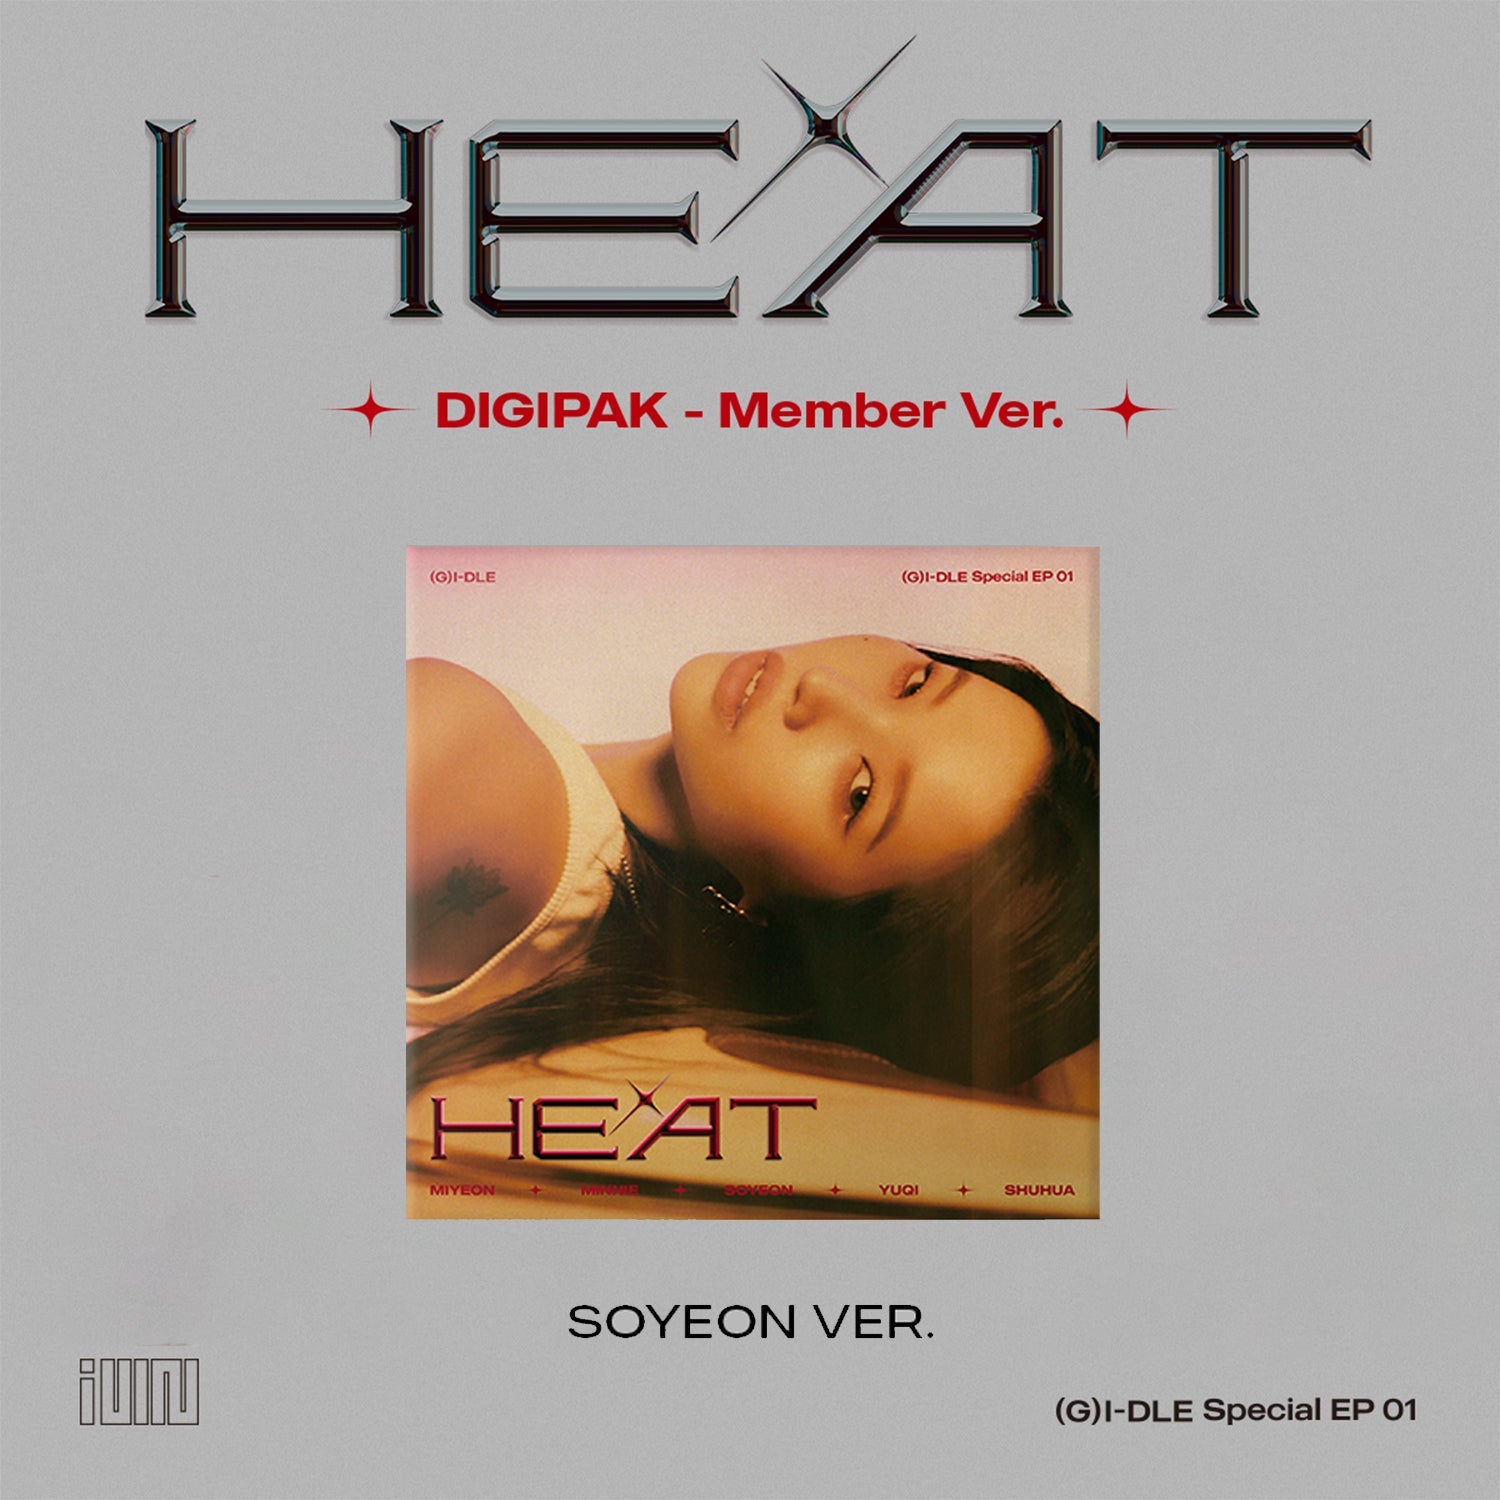 (G)I-DLE SPECIAL ALBUM 'HEAT' (DIGIPACK) SOYEON VERSION COVER